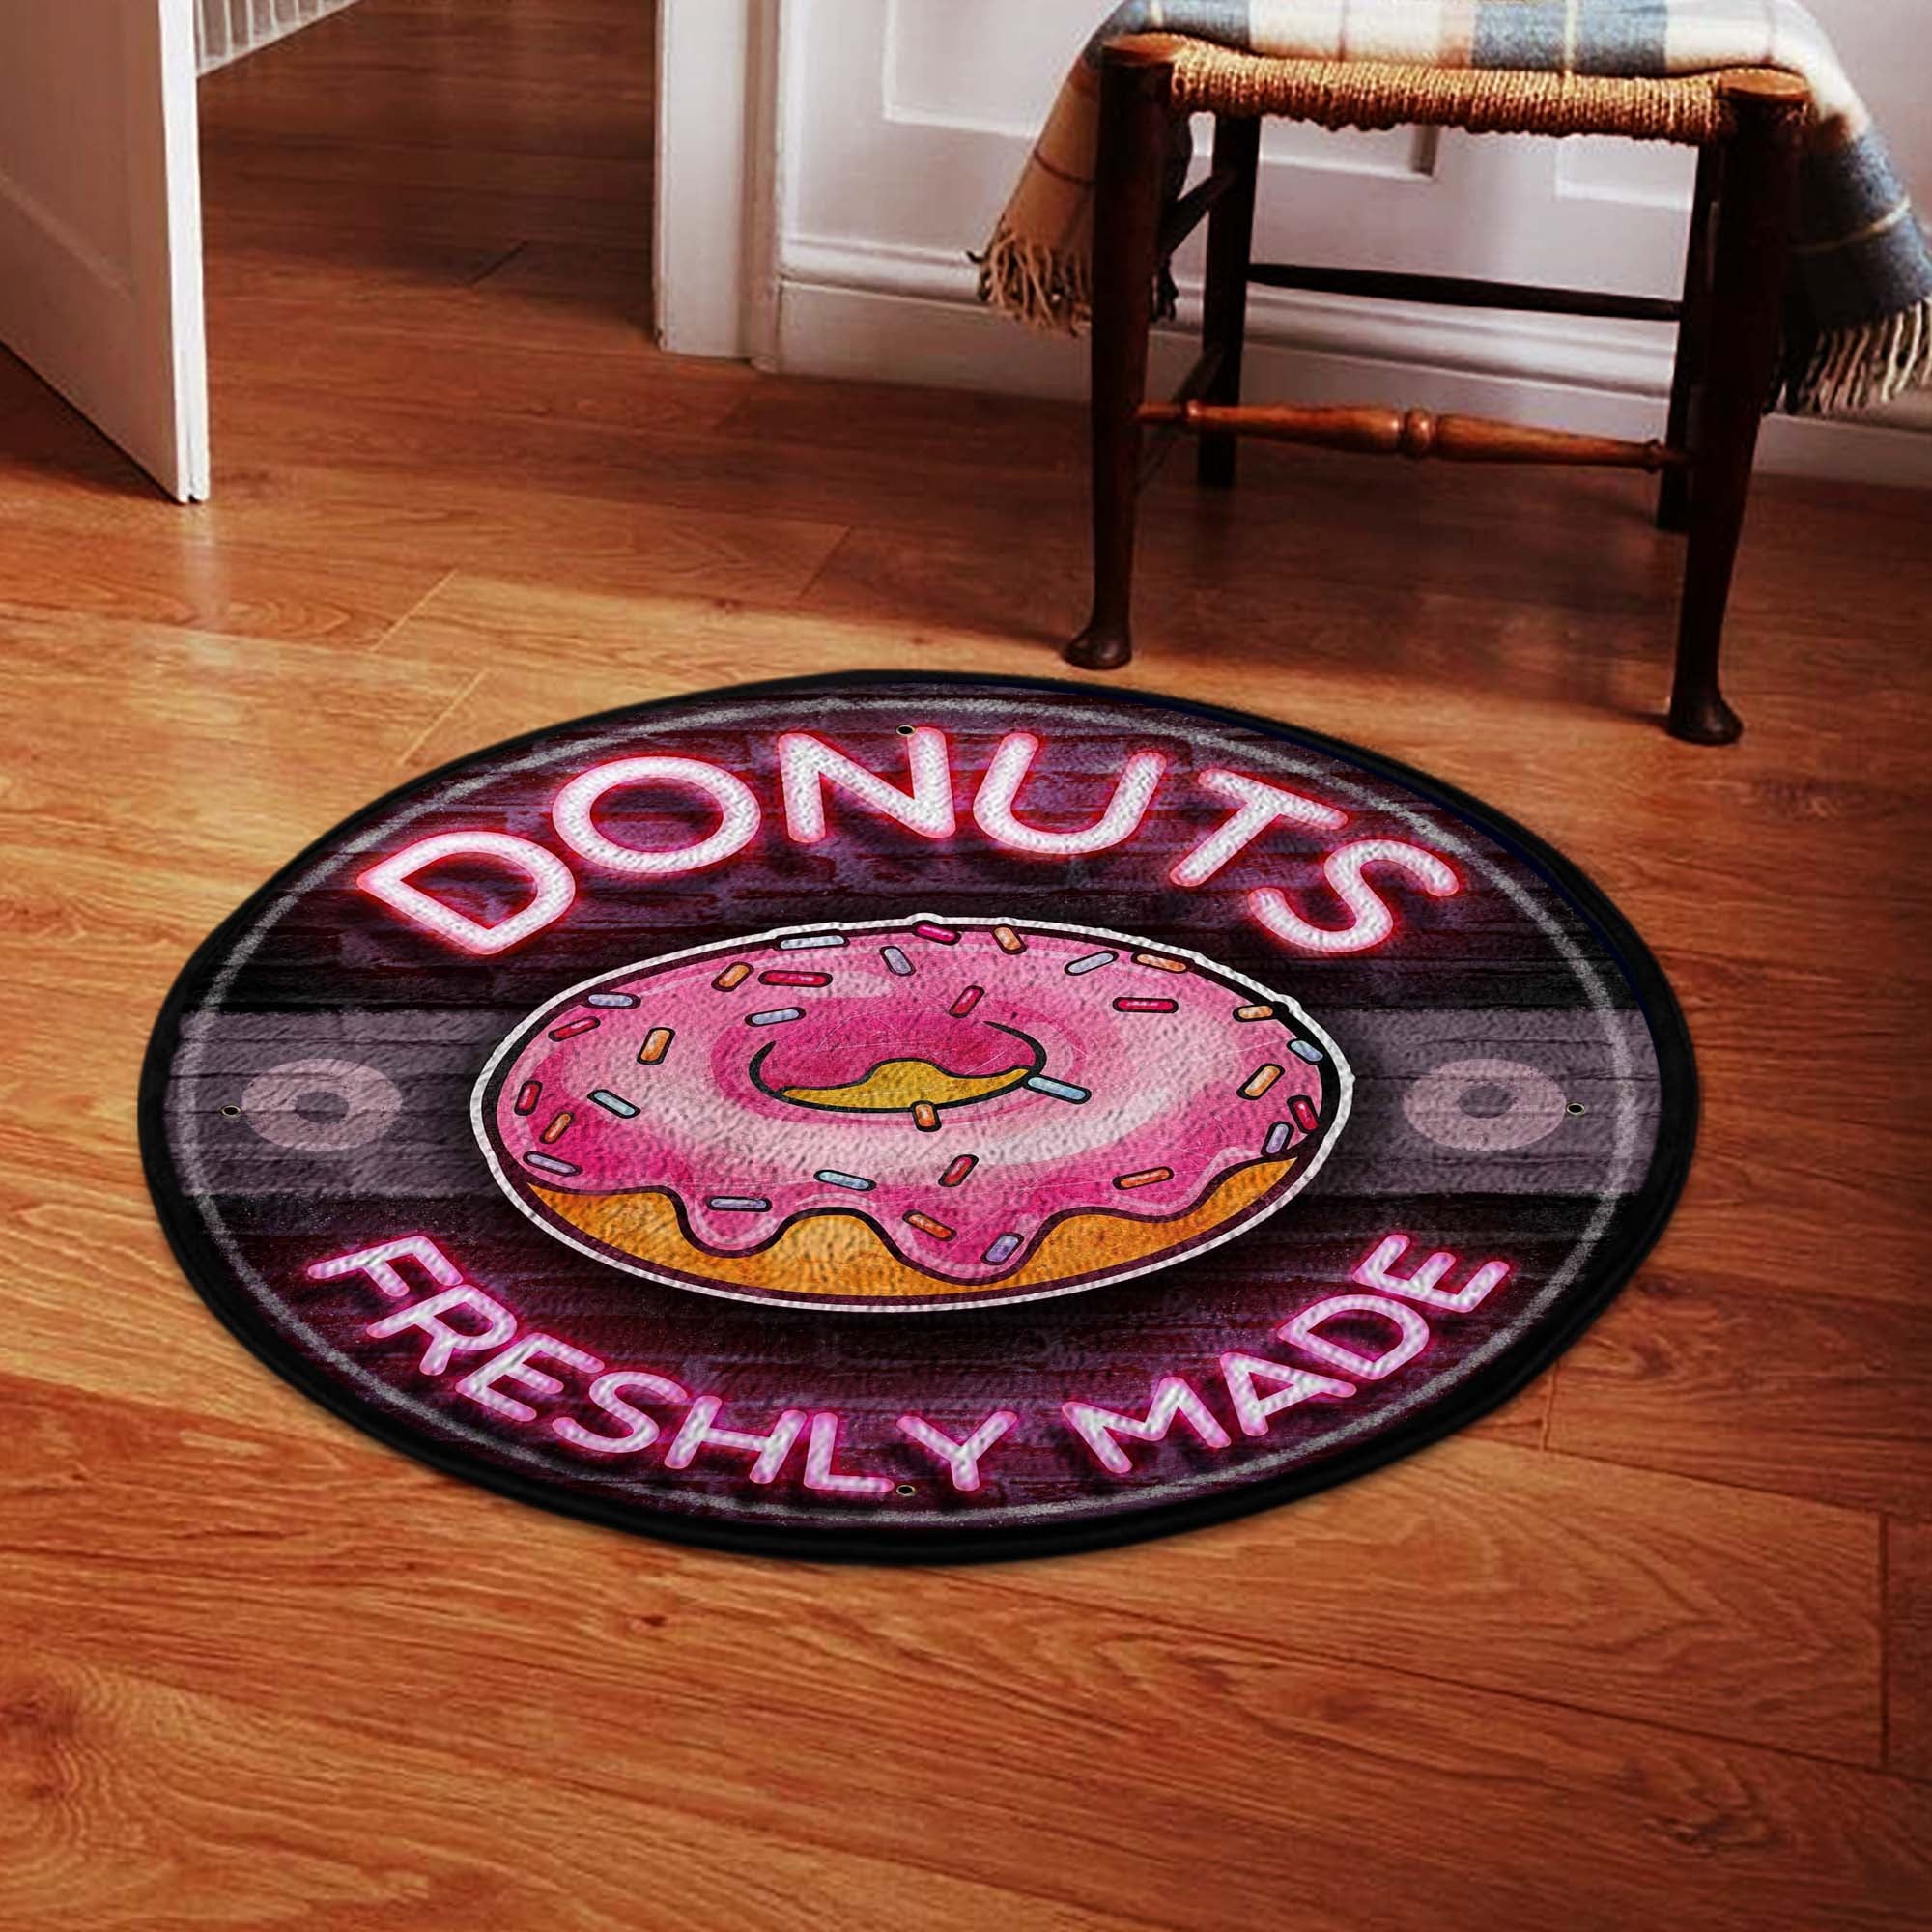 Donuts Freshly Made Round Mat 06364